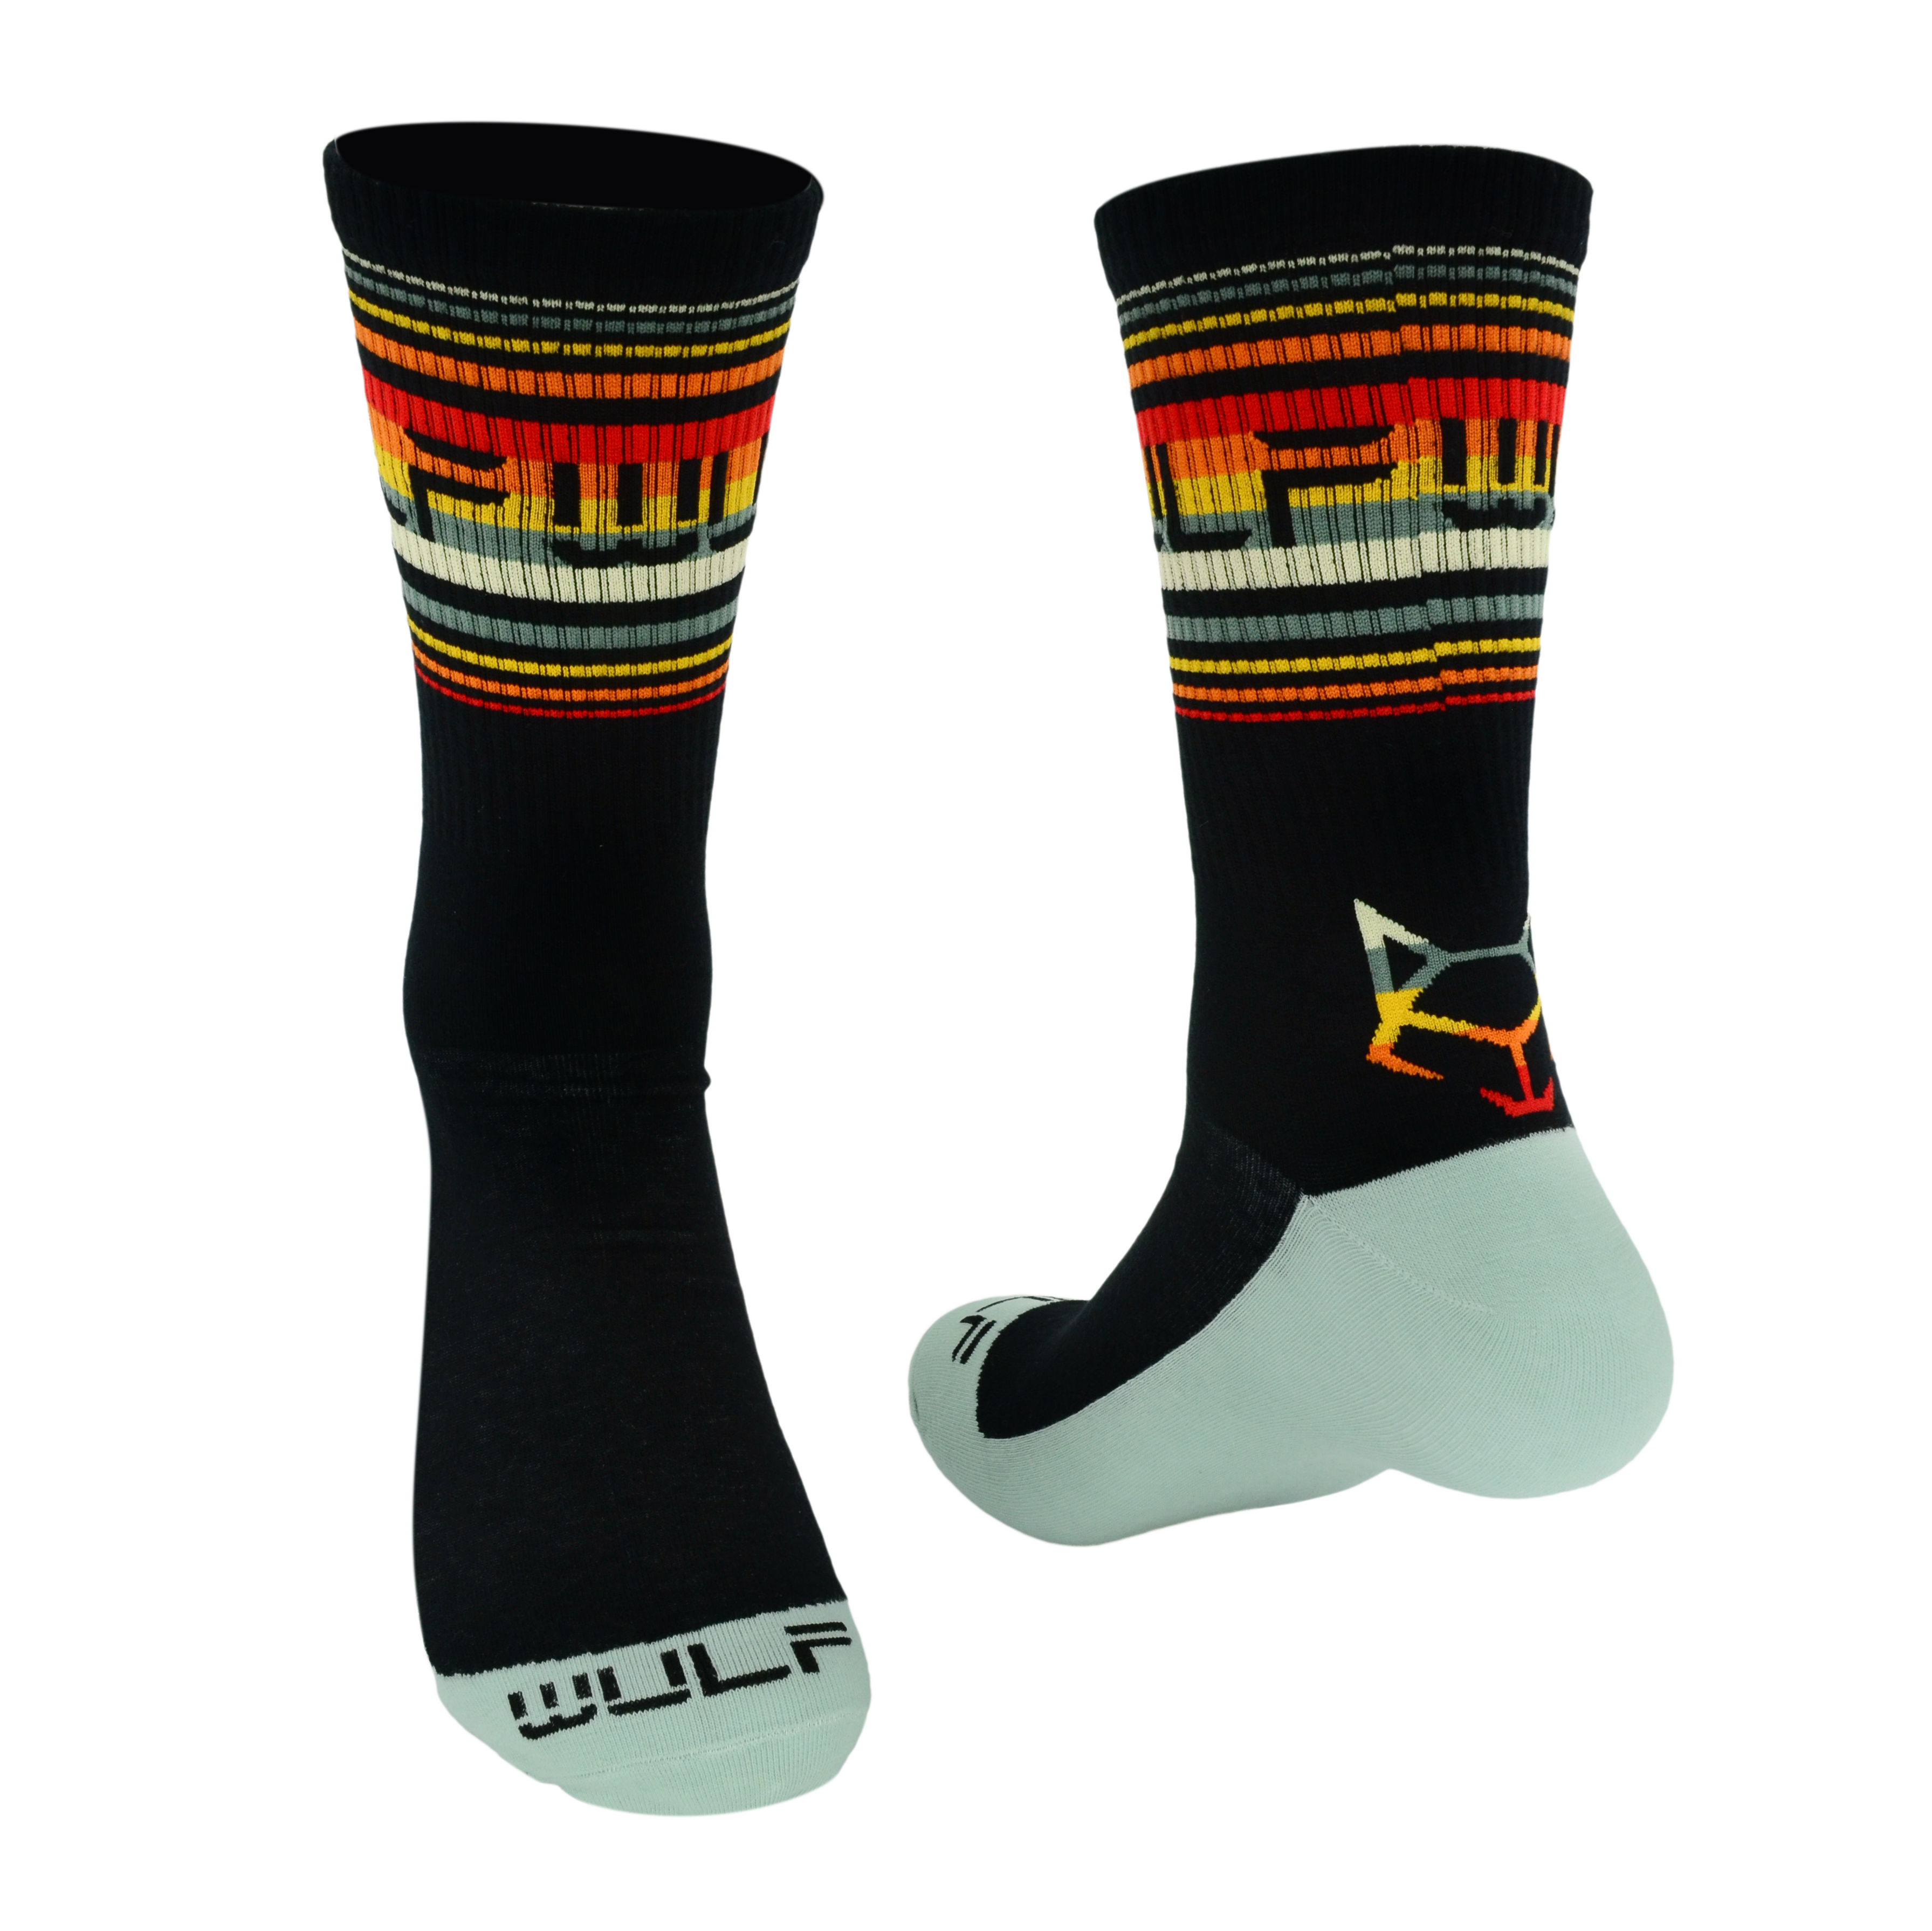 Elevate your commanding presence with our extraordinary Wulf-Wear Crew Socks that demand the spotlight in any room. The cuff showcases captivating rainbow stripes against navy blue, effortlessly adding a pop of color and a free-spirited touch to your athletic attire. The navy blue descends into a light blue sole, creating a seamless and stylish transition. 